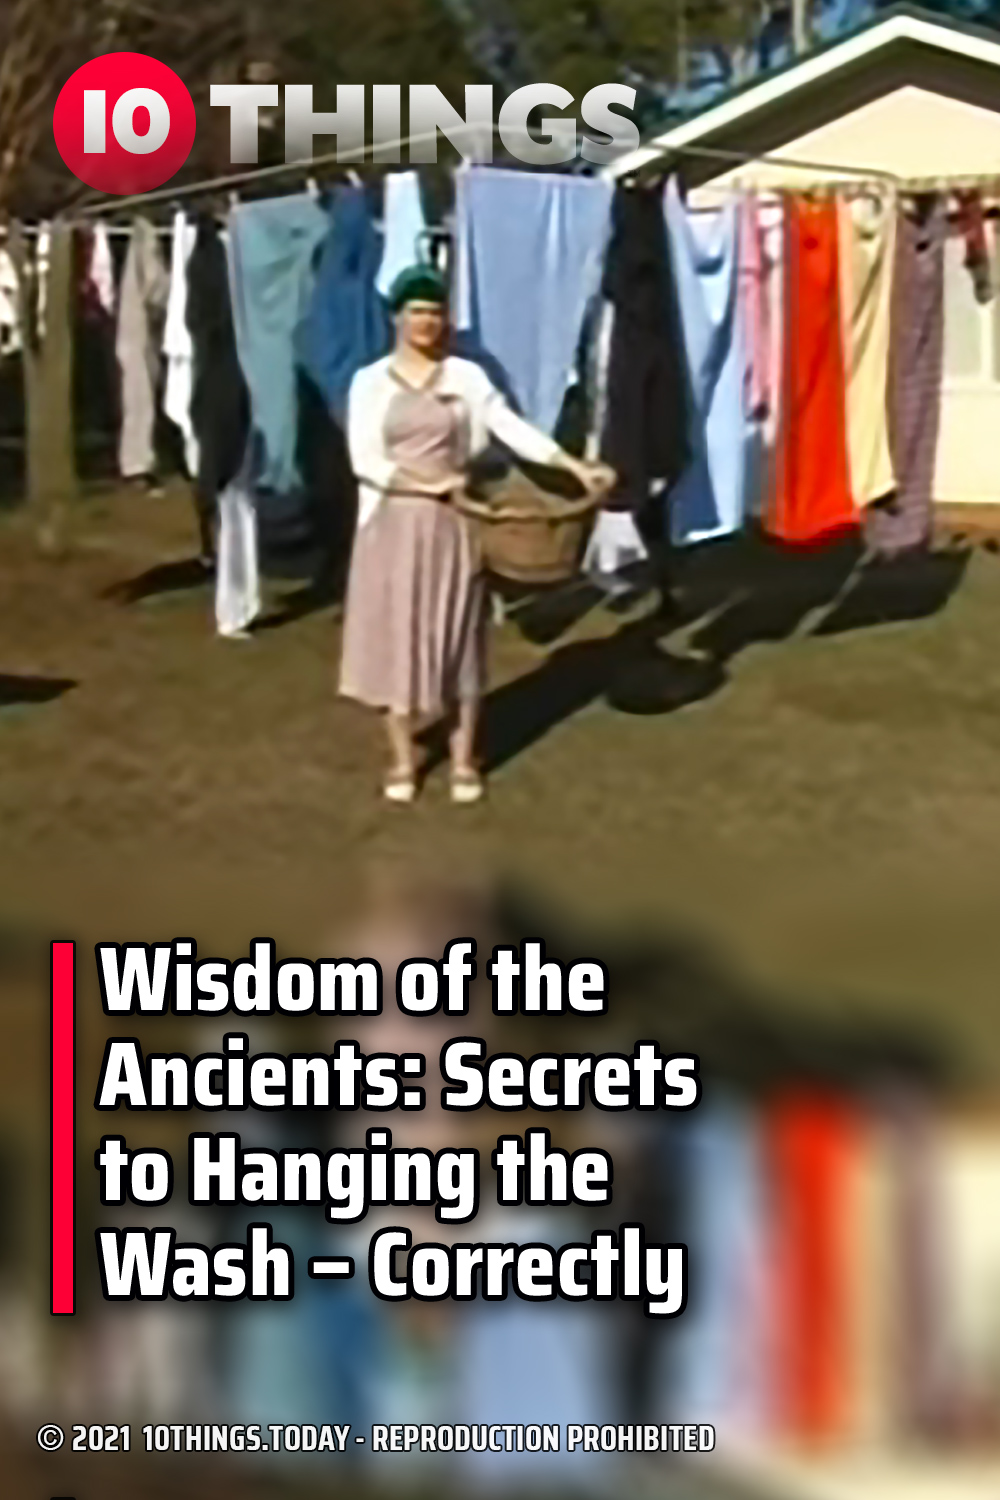 Wisdom of the Ancients: Secrets to Hanging the Wash – Correctly